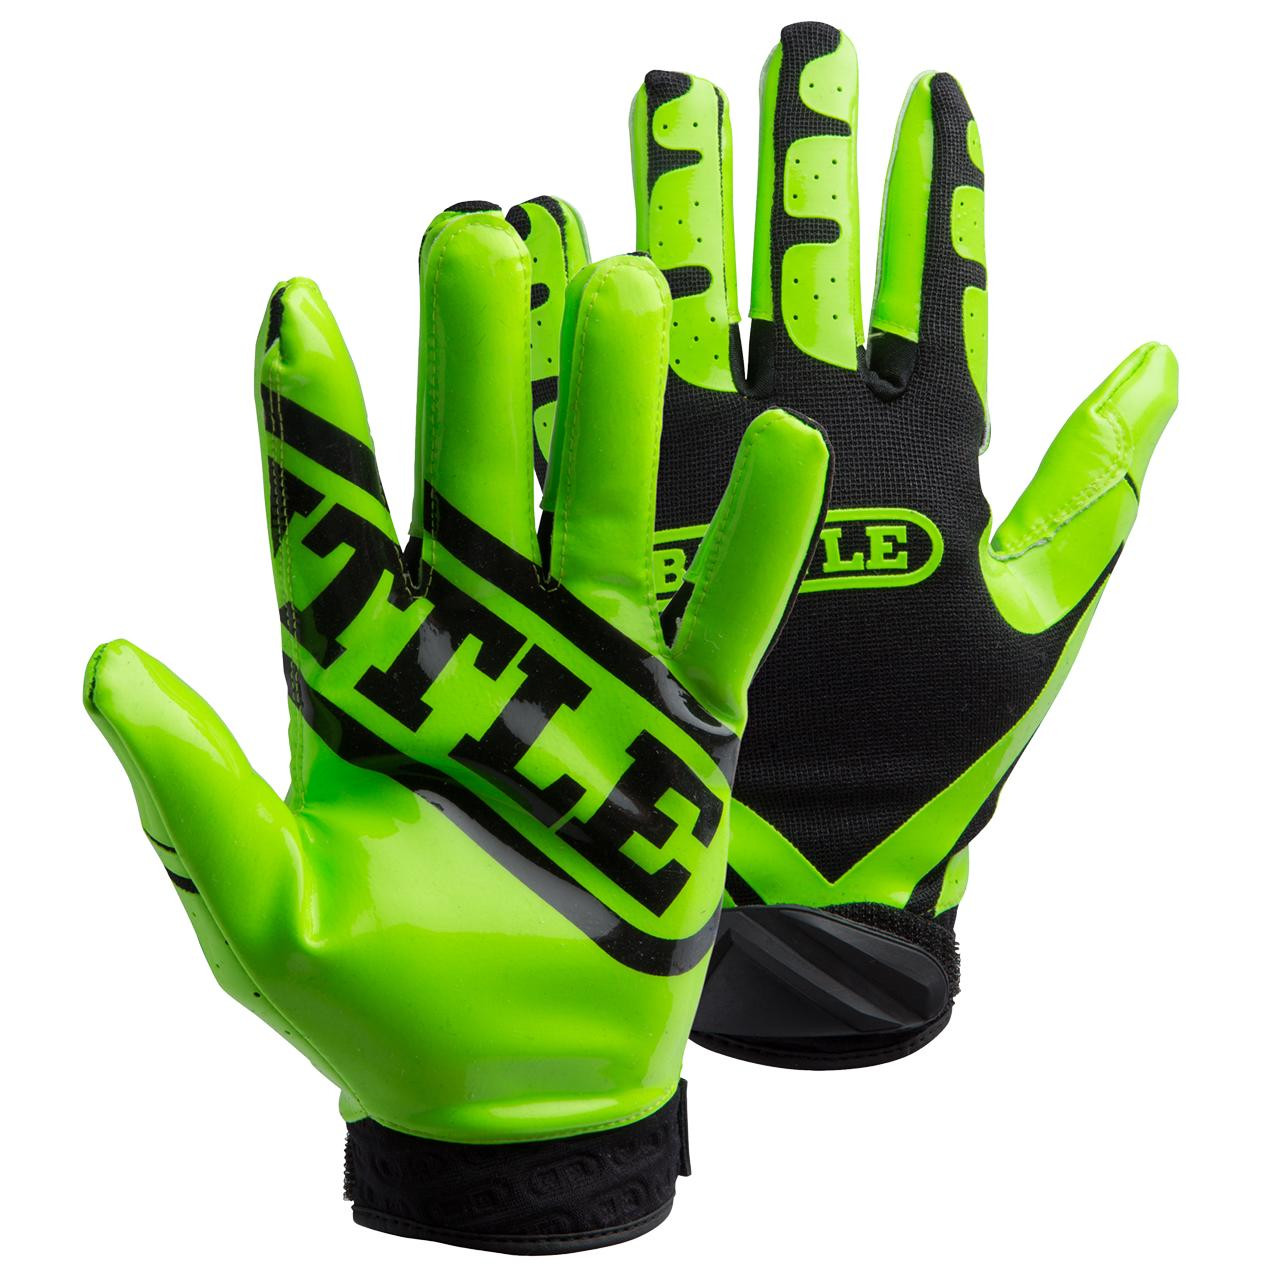 Football Gloves for Youth and Adult Sticky Receiver Gloves Size Large Green  NEW